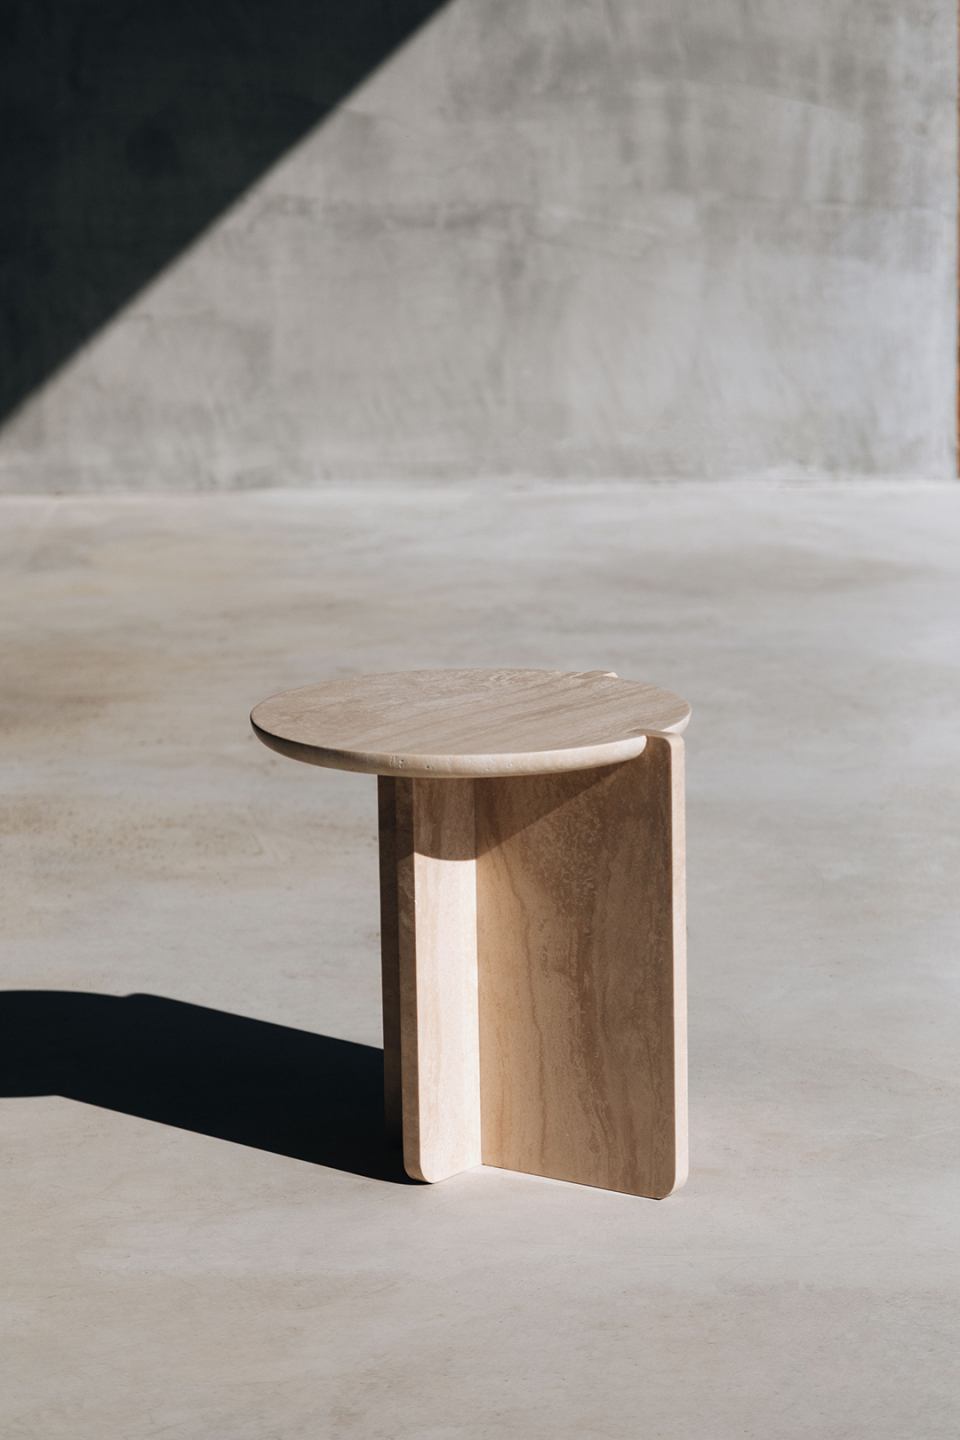 NOTCH TRAVERTINE image 2 | Marble Side Tables | MAAMI HOME 